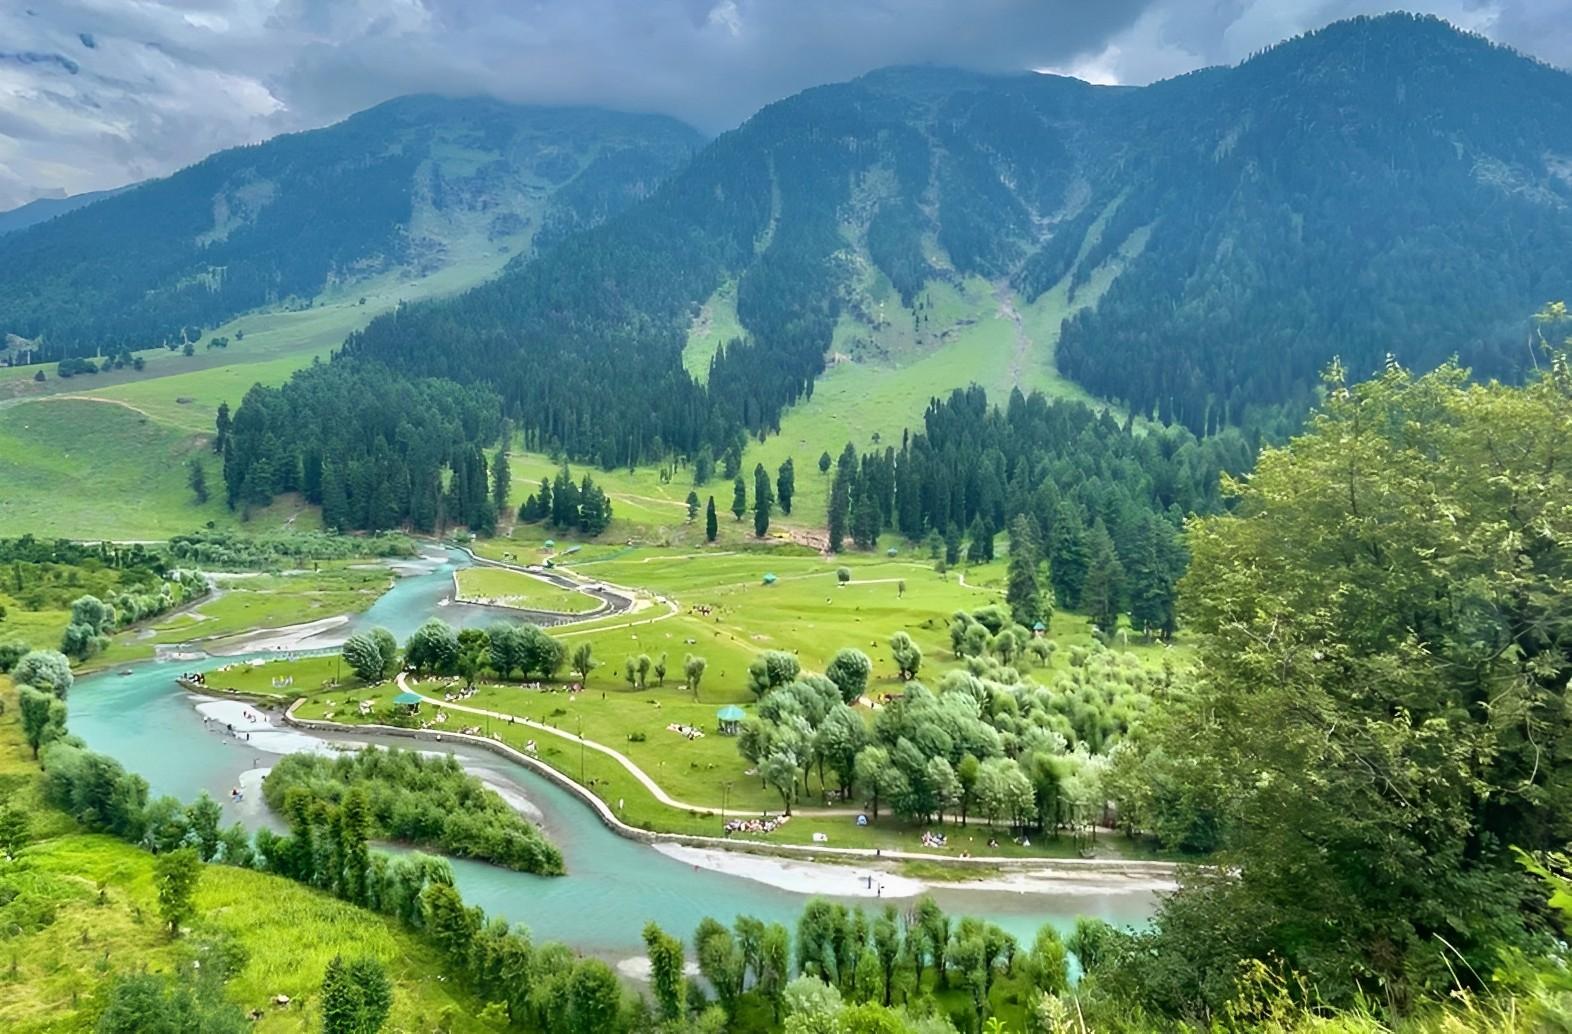 Top 20 Places To Visit In Pahalgam. For amazing trip to Kashmir!